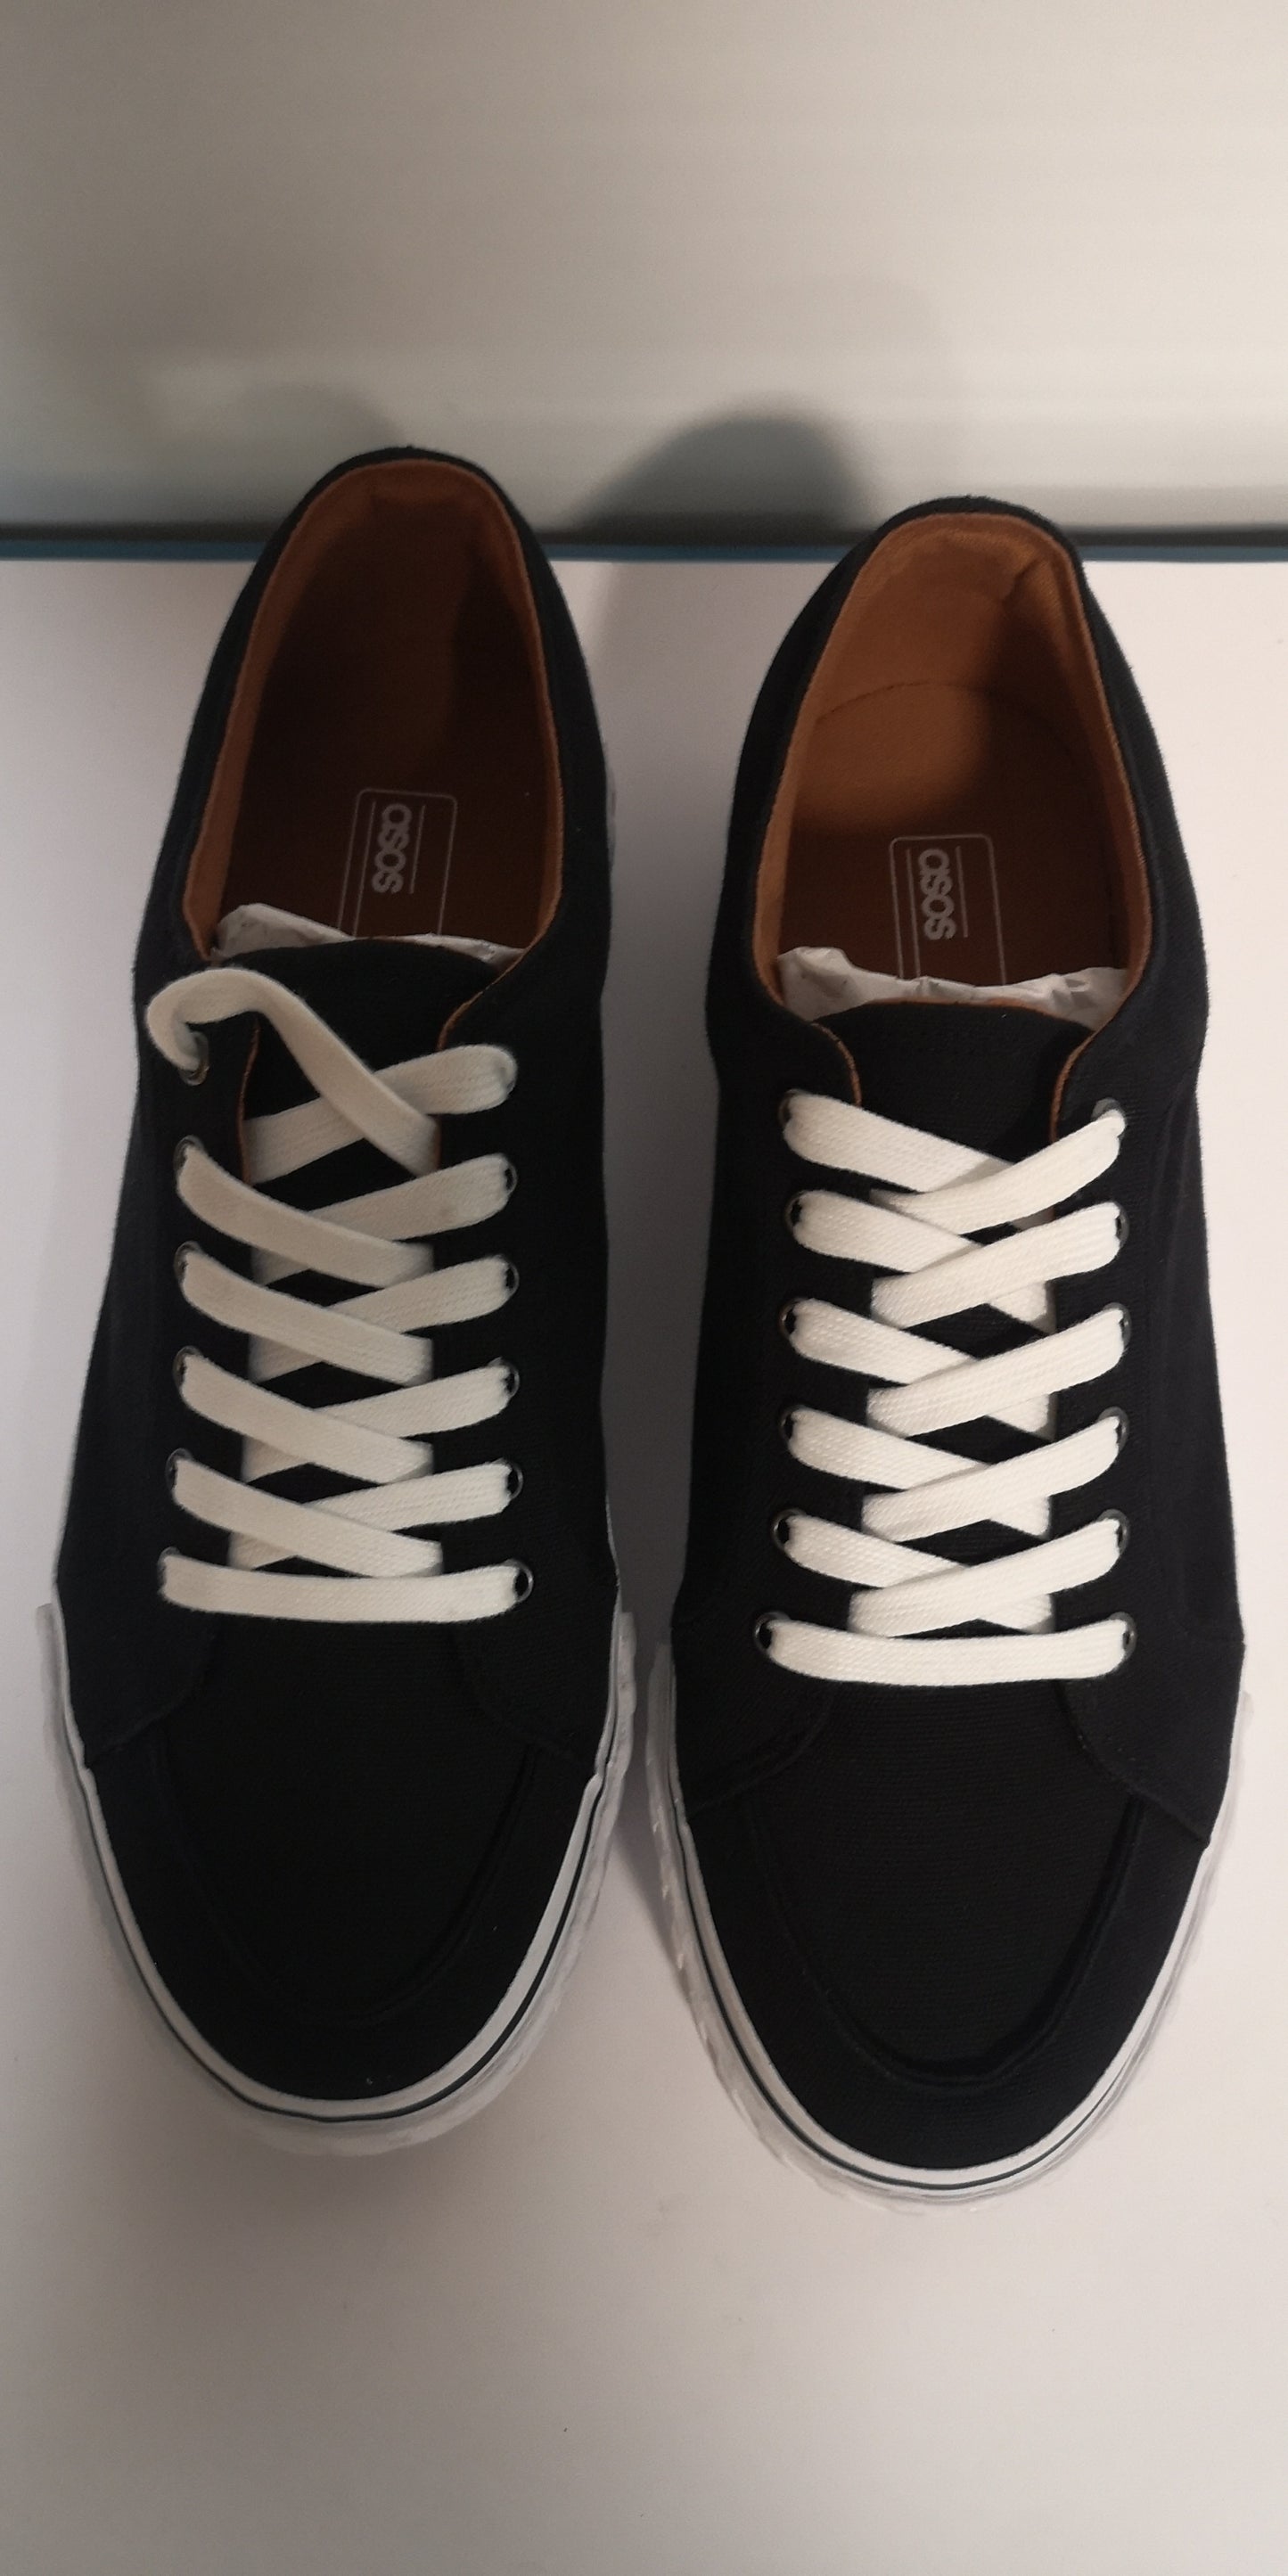 ASOS Black Men's Canvas Shoes Size 10 - New without tags